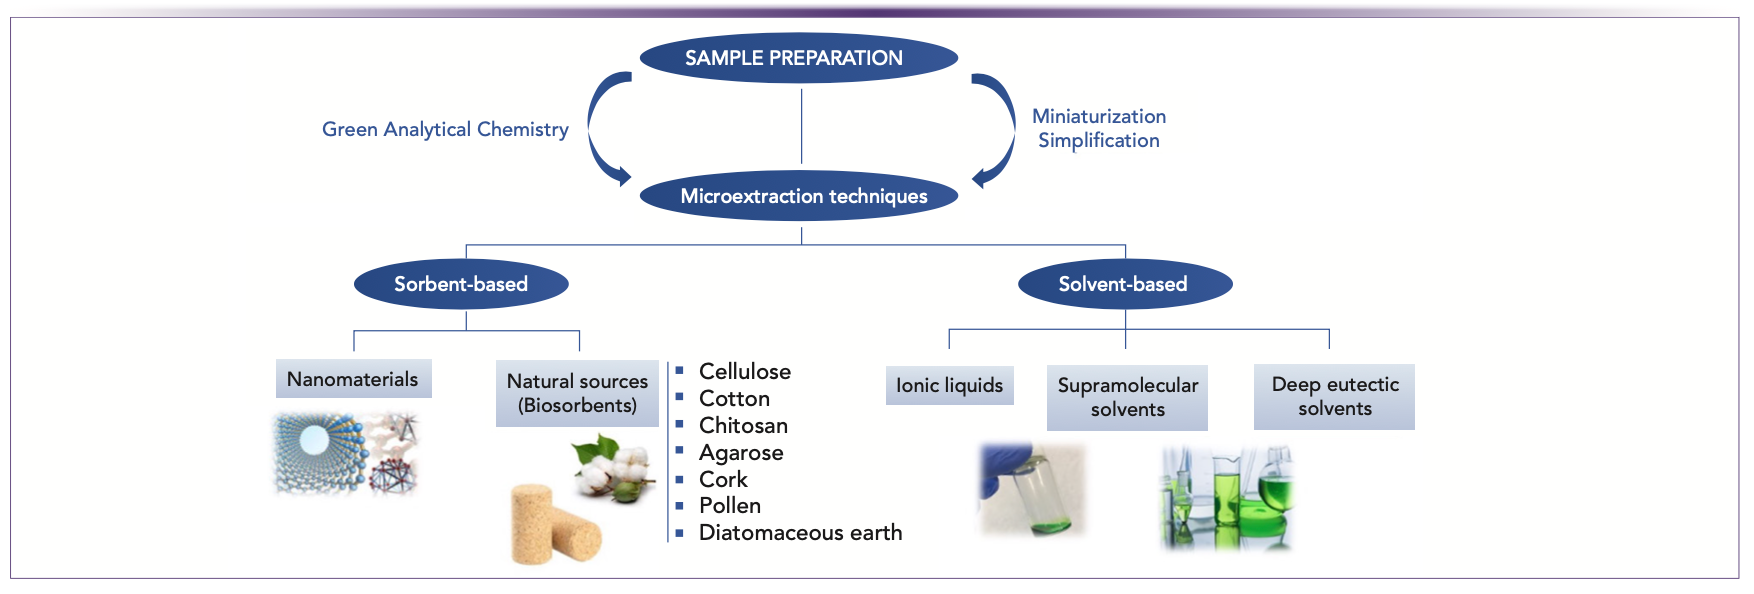 FIGURE 1: Overview of green materials in microextraction techniques.